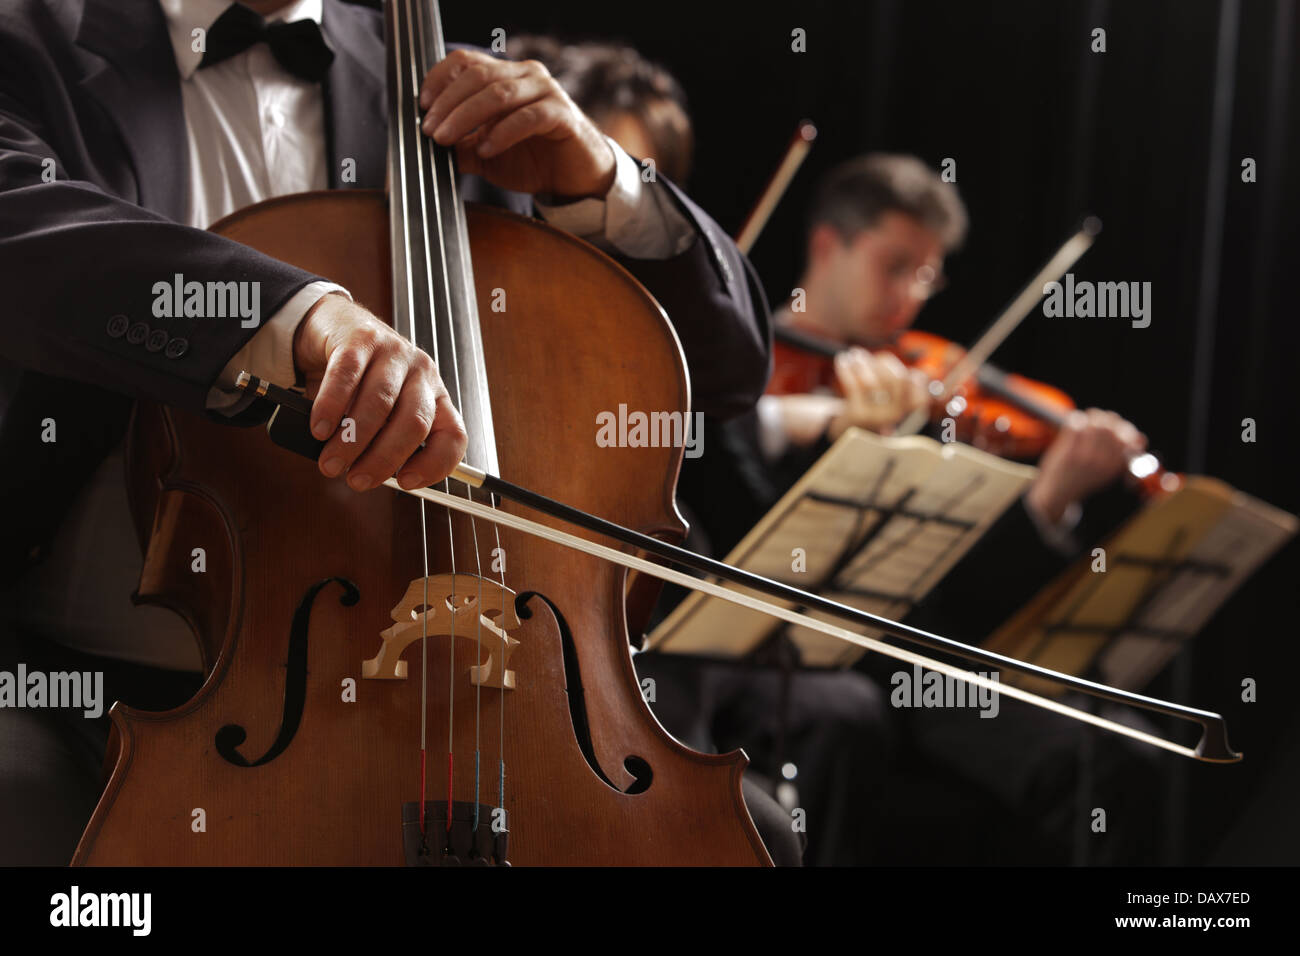 Classical music, cellist and violinists Stock Photo